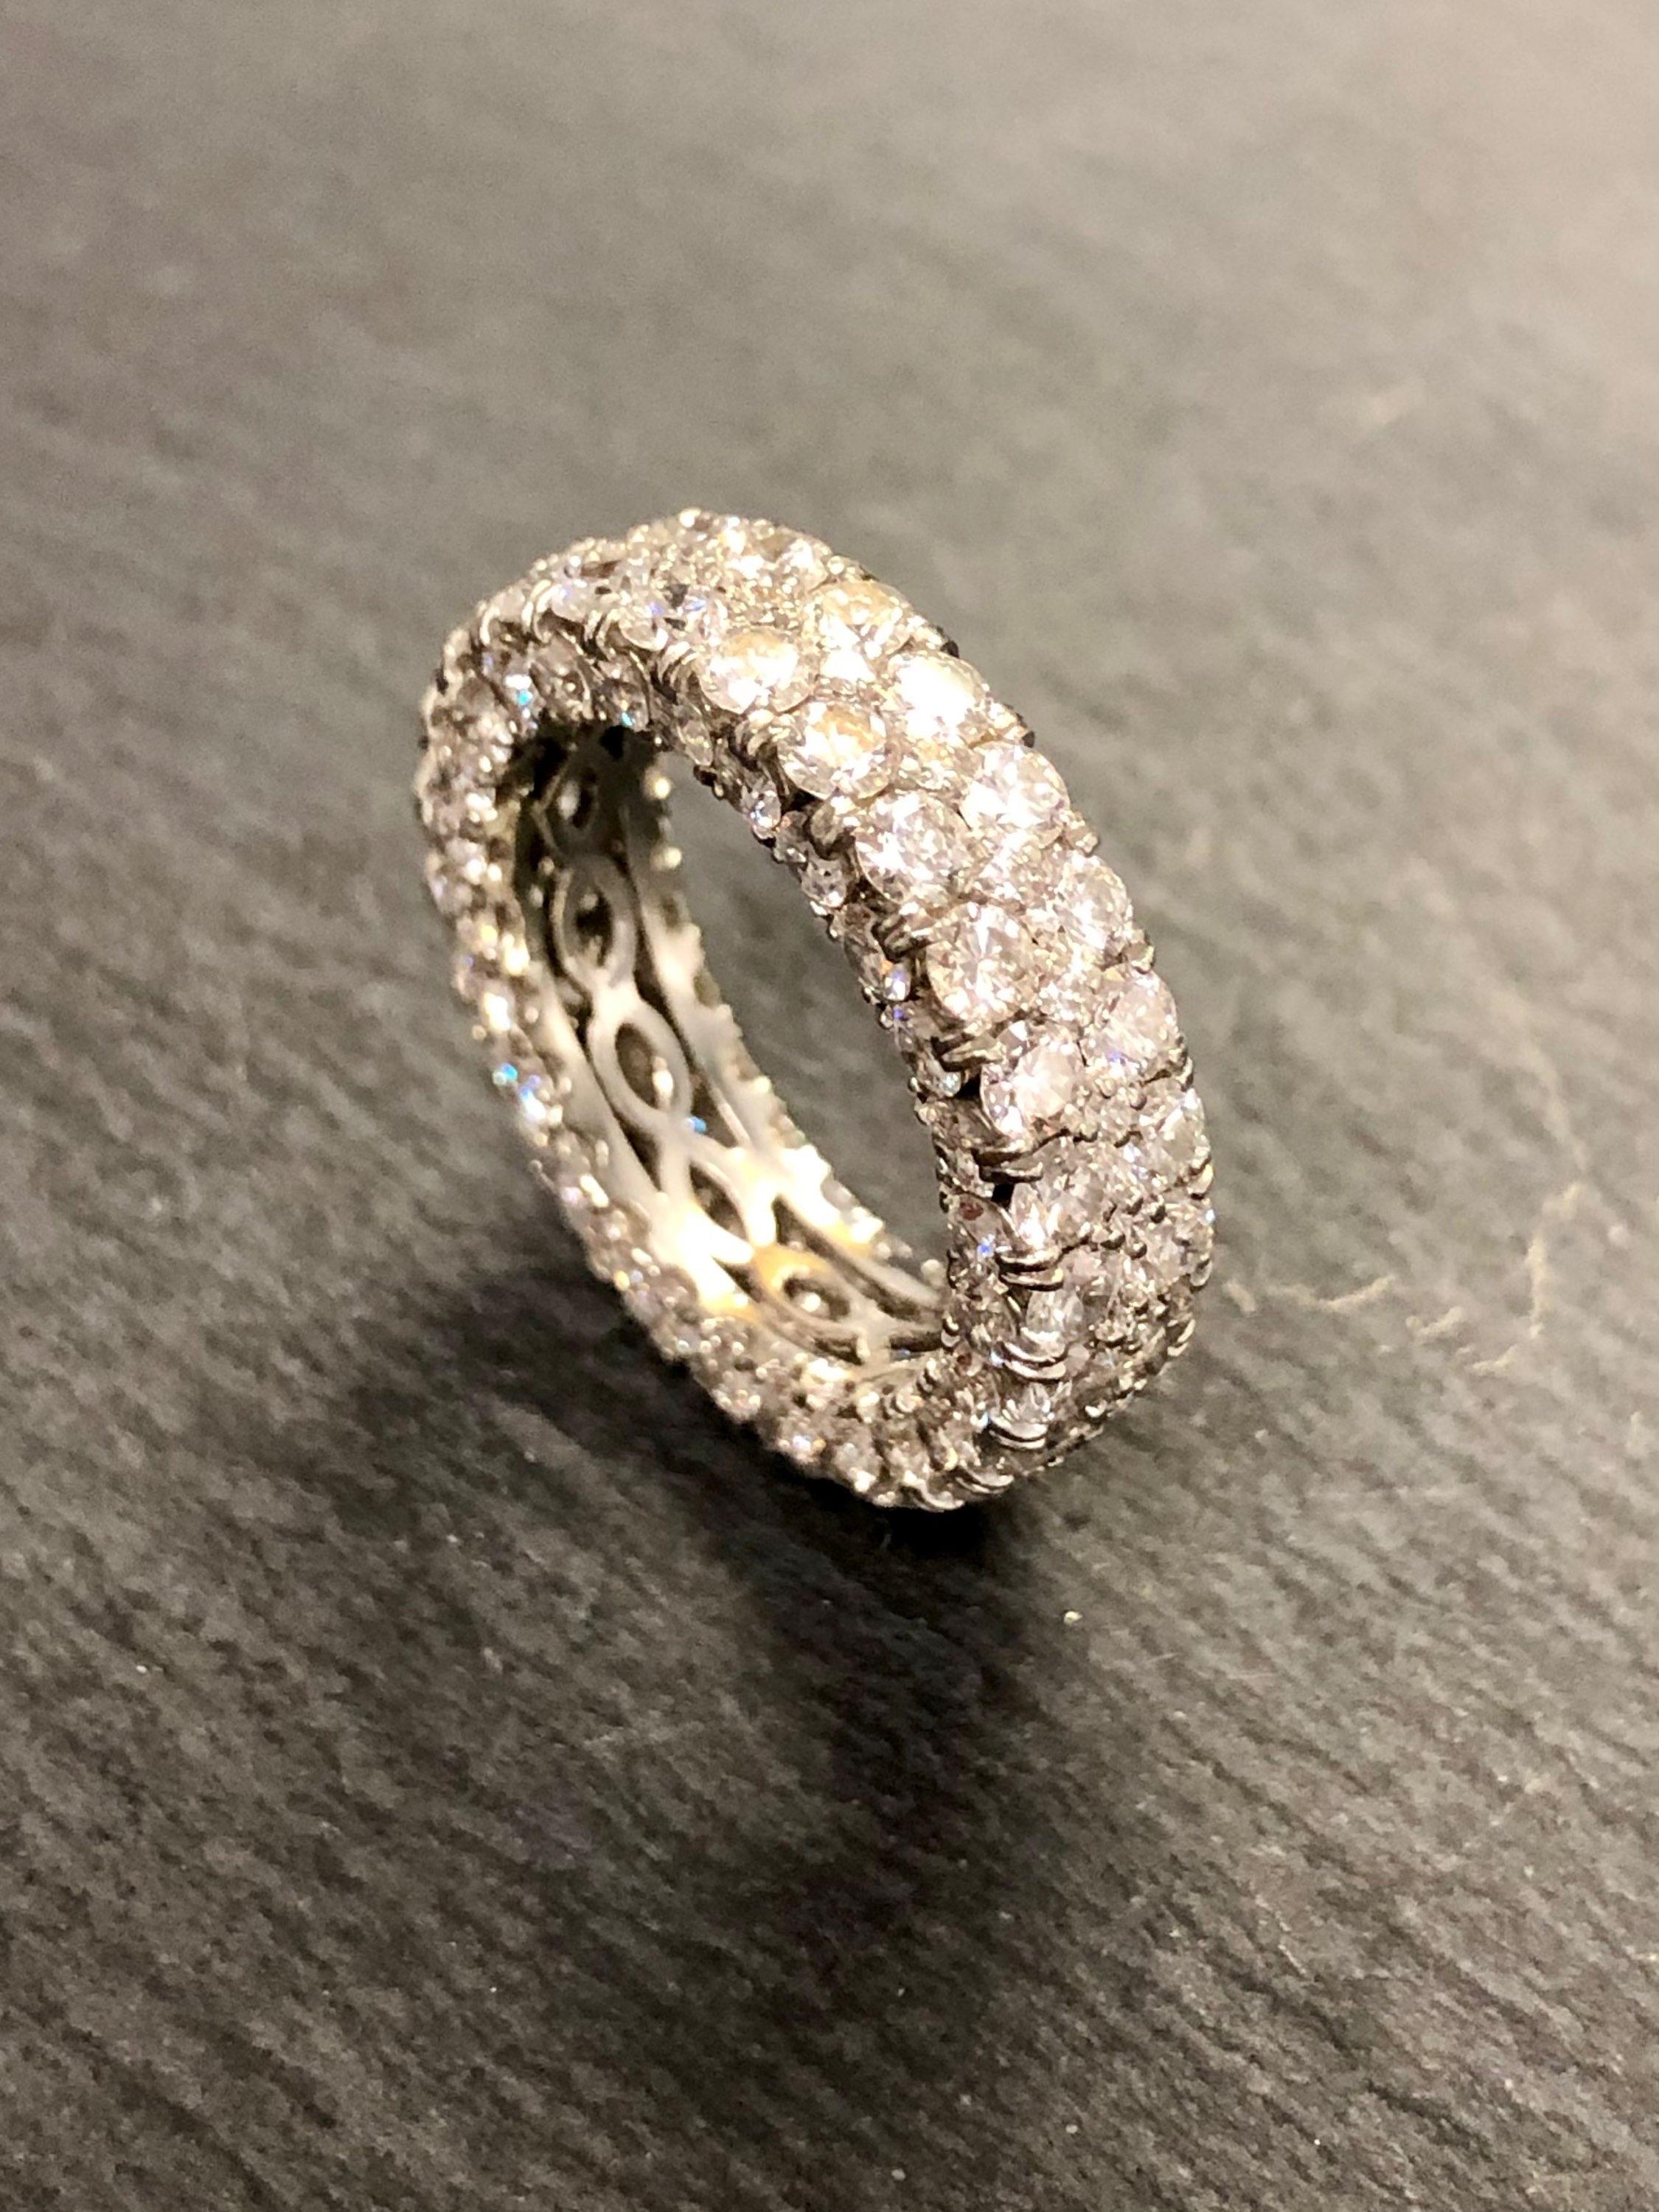 A beautifully done band done in 18K white gold set on the top and sides with 5 rows of G-H color Vs1-2 clarity diamonds with a total approximate weight of 5.50cttw.

Dimensions/Weight
5.75mm wide and it is a size 6. Weighs 3.6dwt.

Condition
All